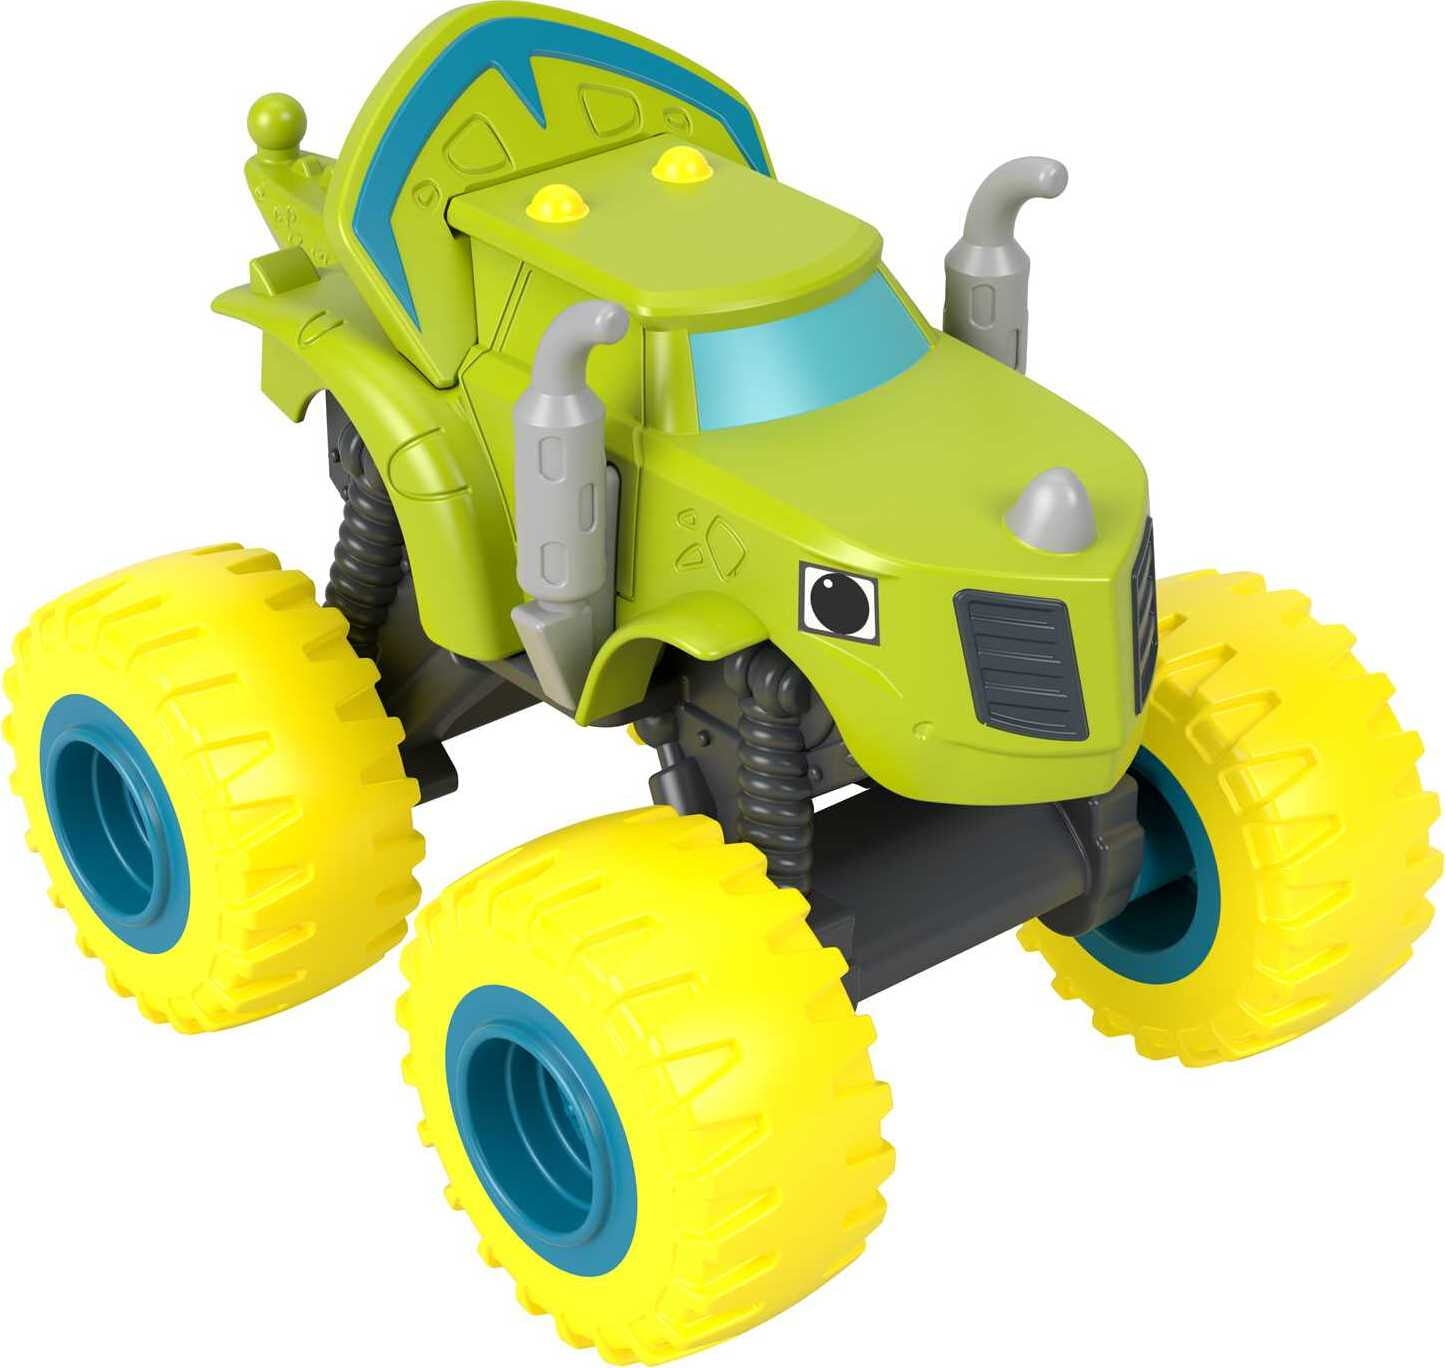 Fisher-Price Blaze and the Monster Machines Neon Wheels 5-Pack of Diecast  Toy Trucks